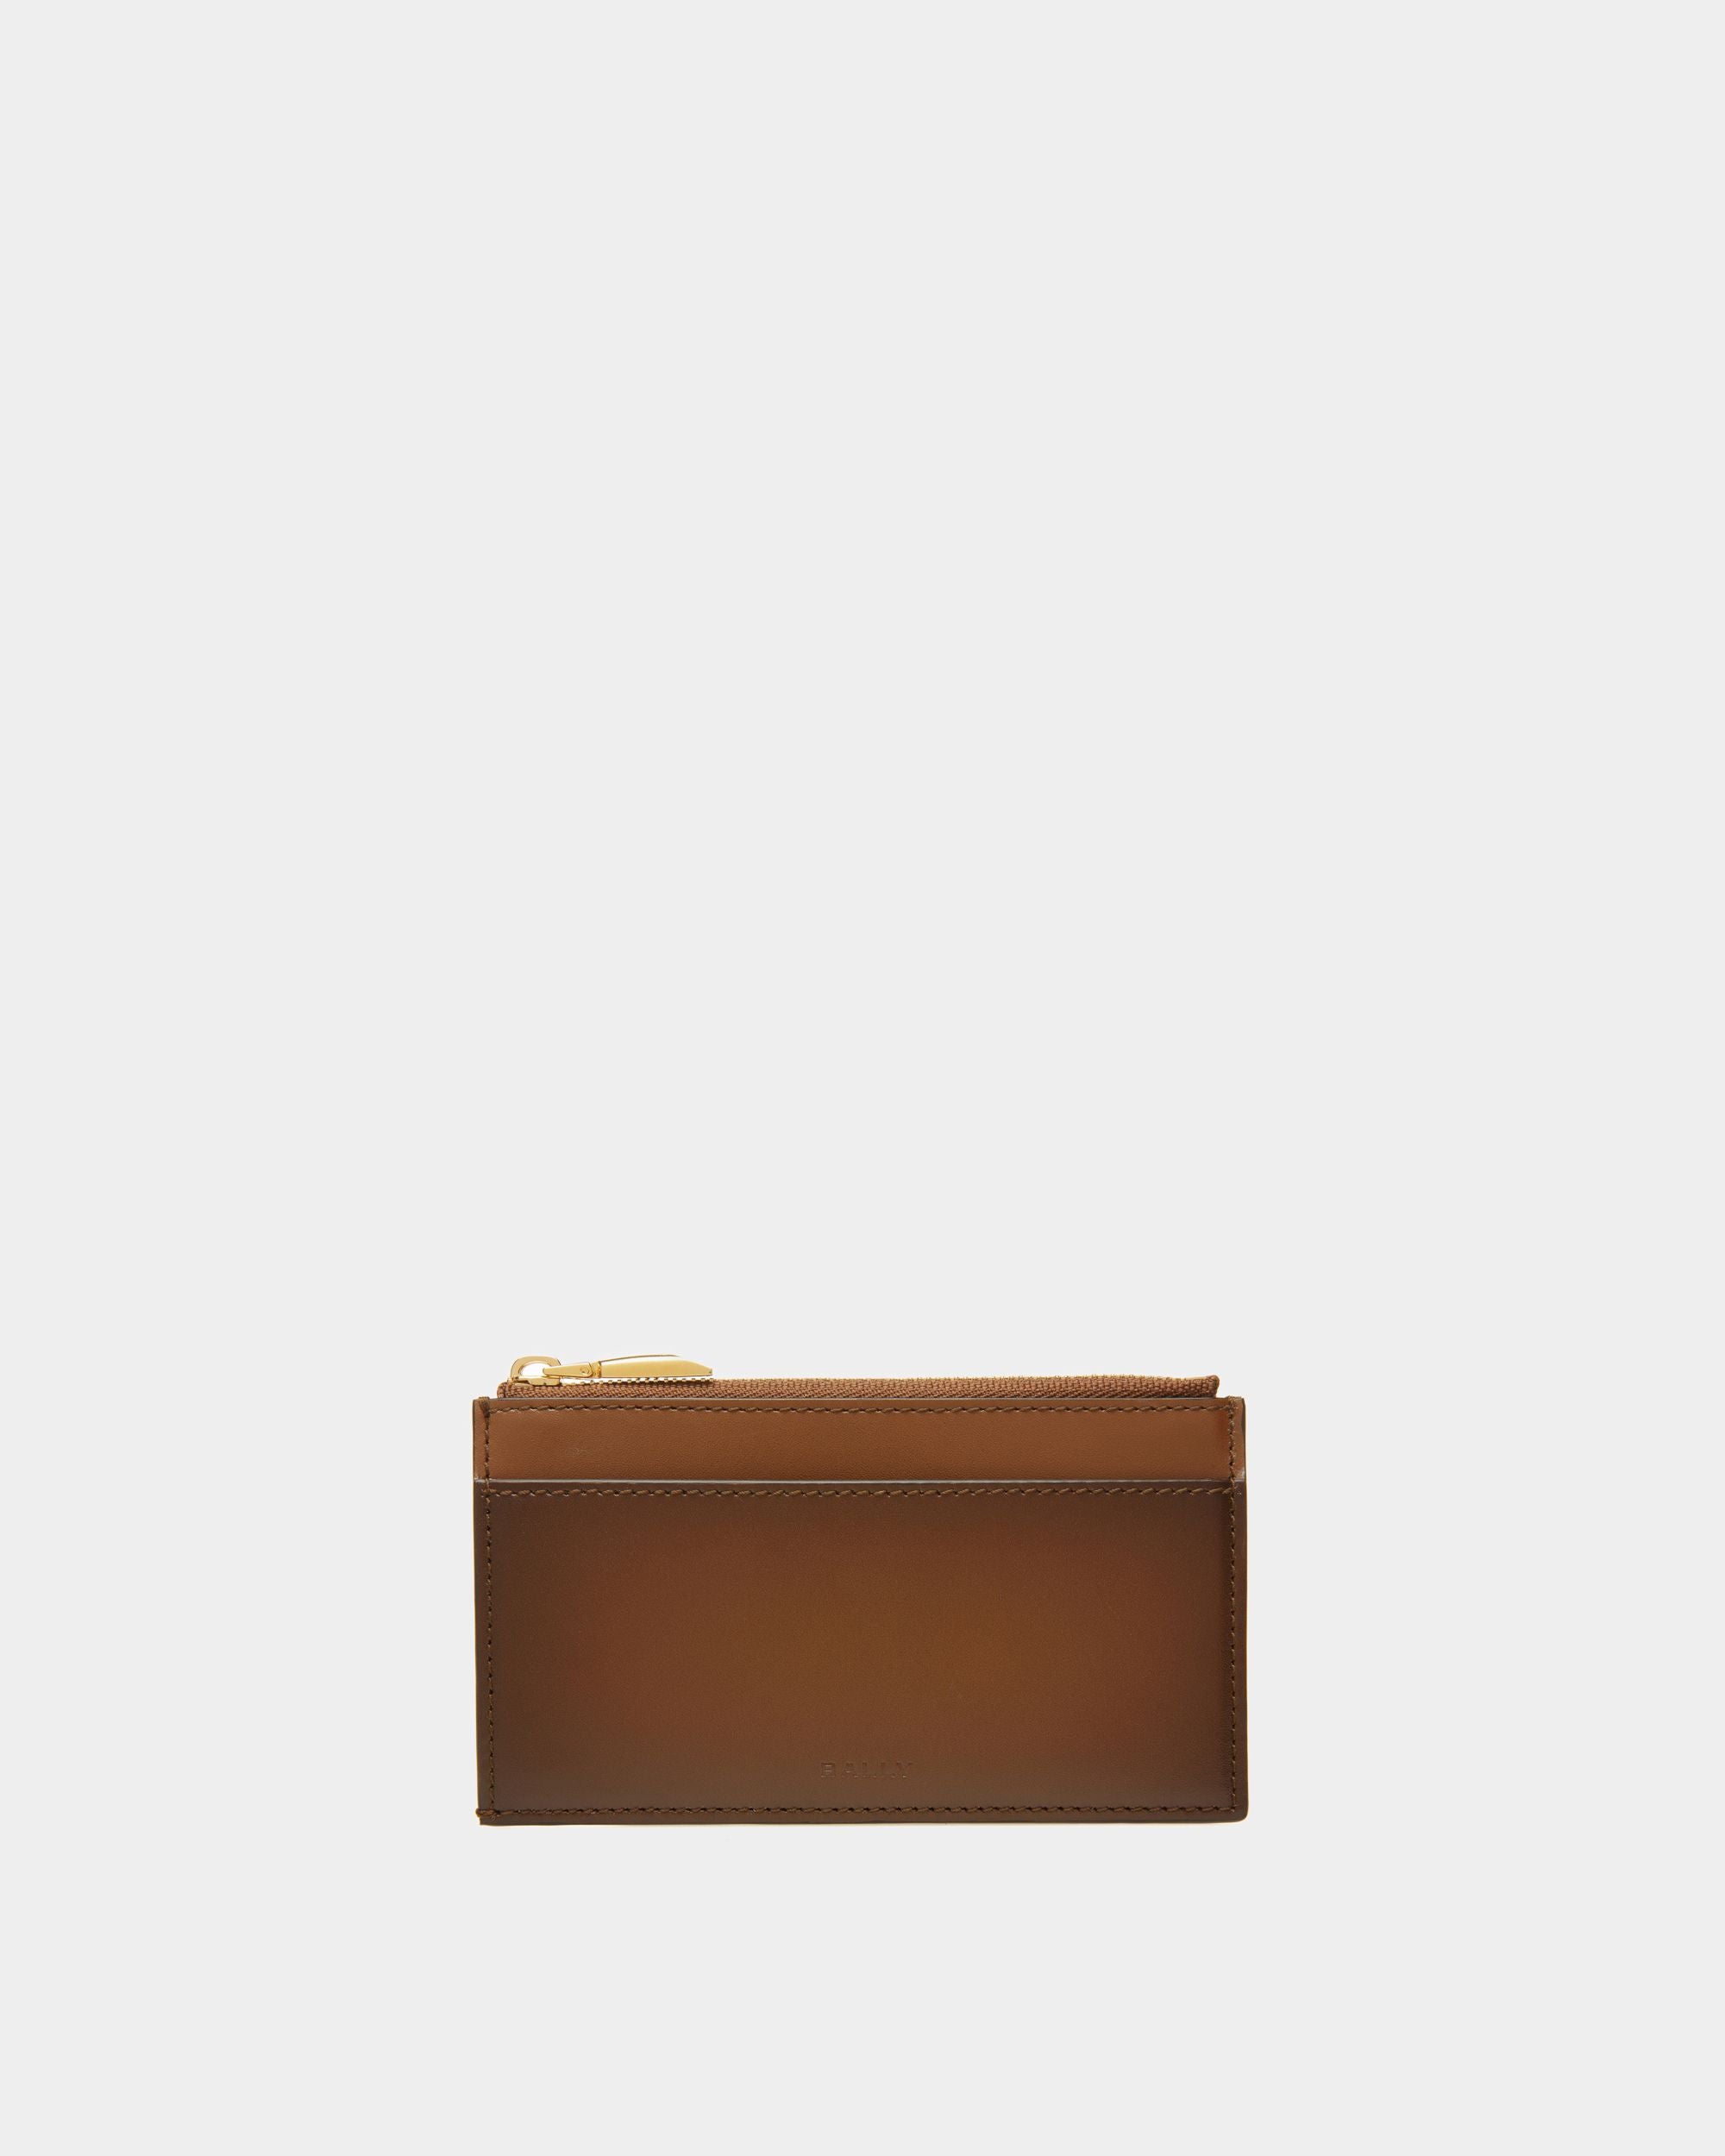 Speciale Card Holder | Men's Card Holder | Brown Leather | Bally | Still Life Front